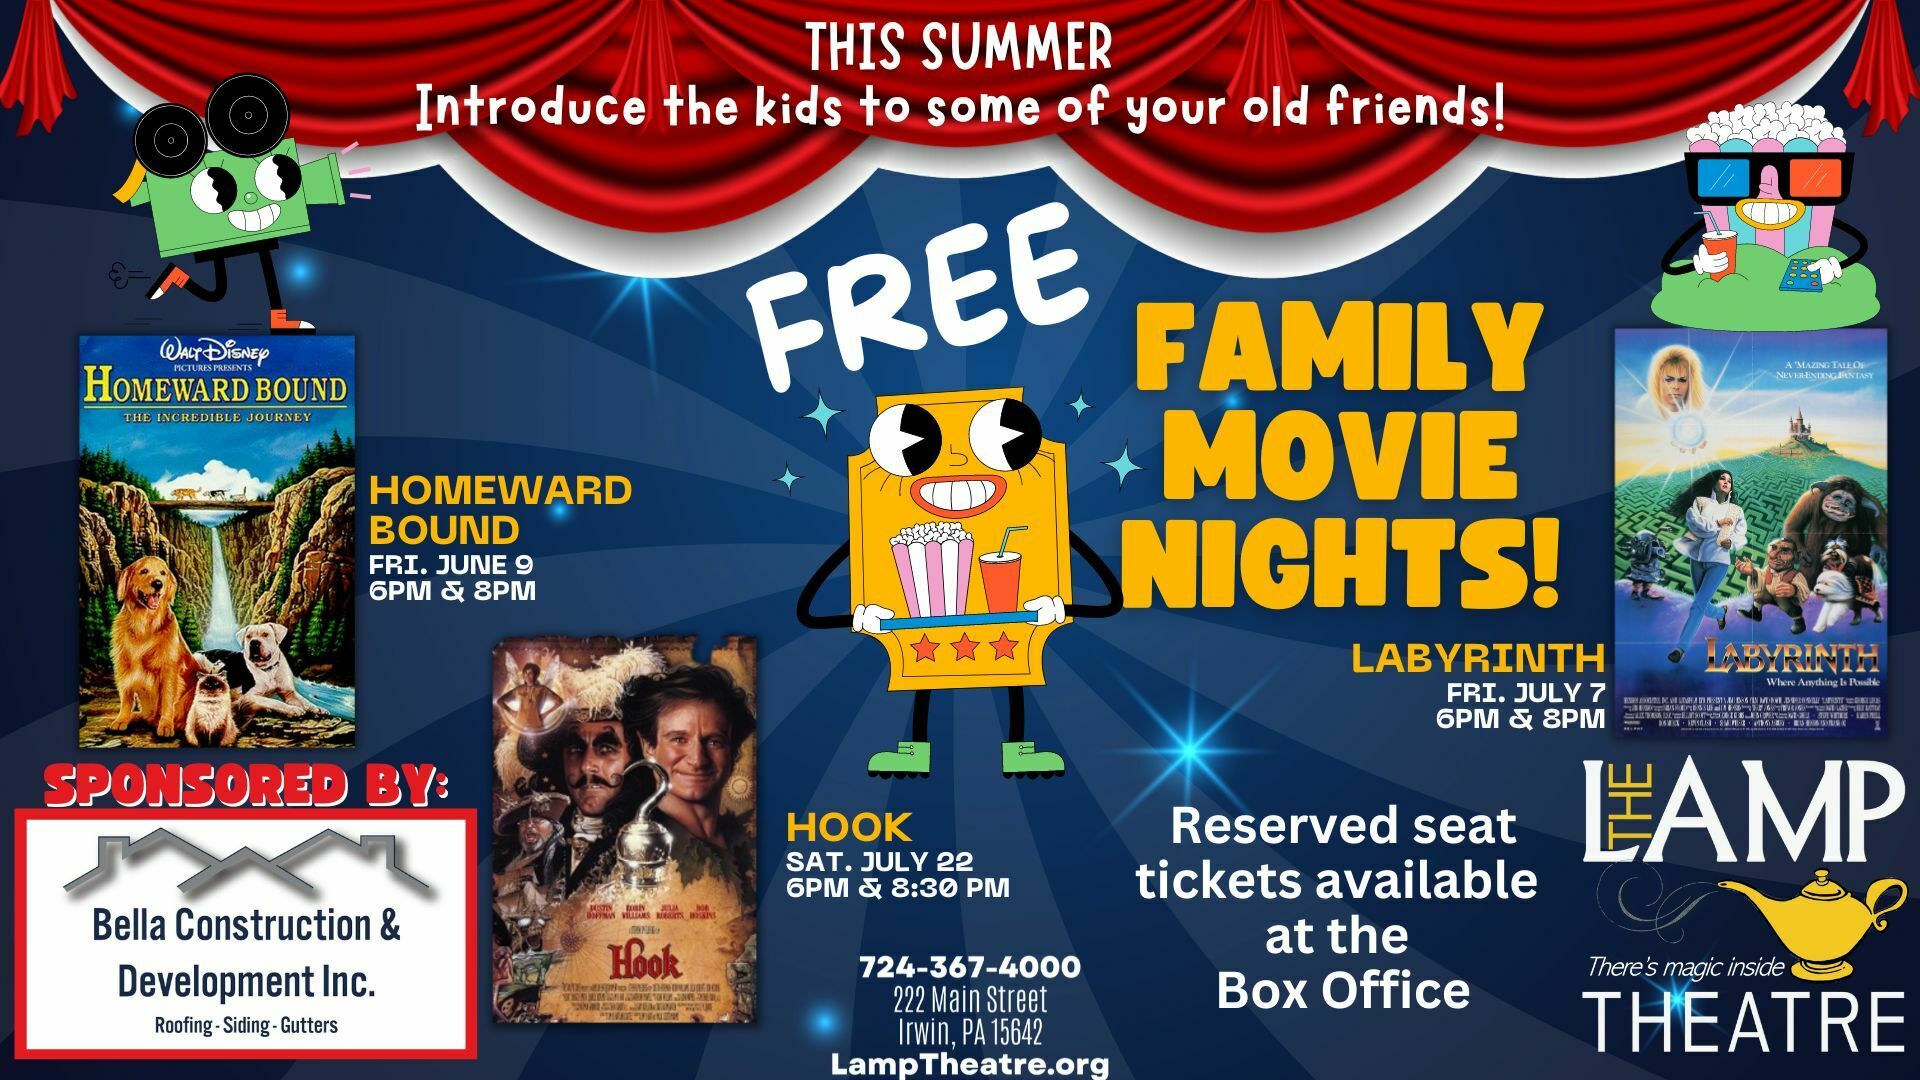 FREE Family Movie Nights sponsored by Bella Construction and Development Inc., Irwin, Pennsylvania, United States